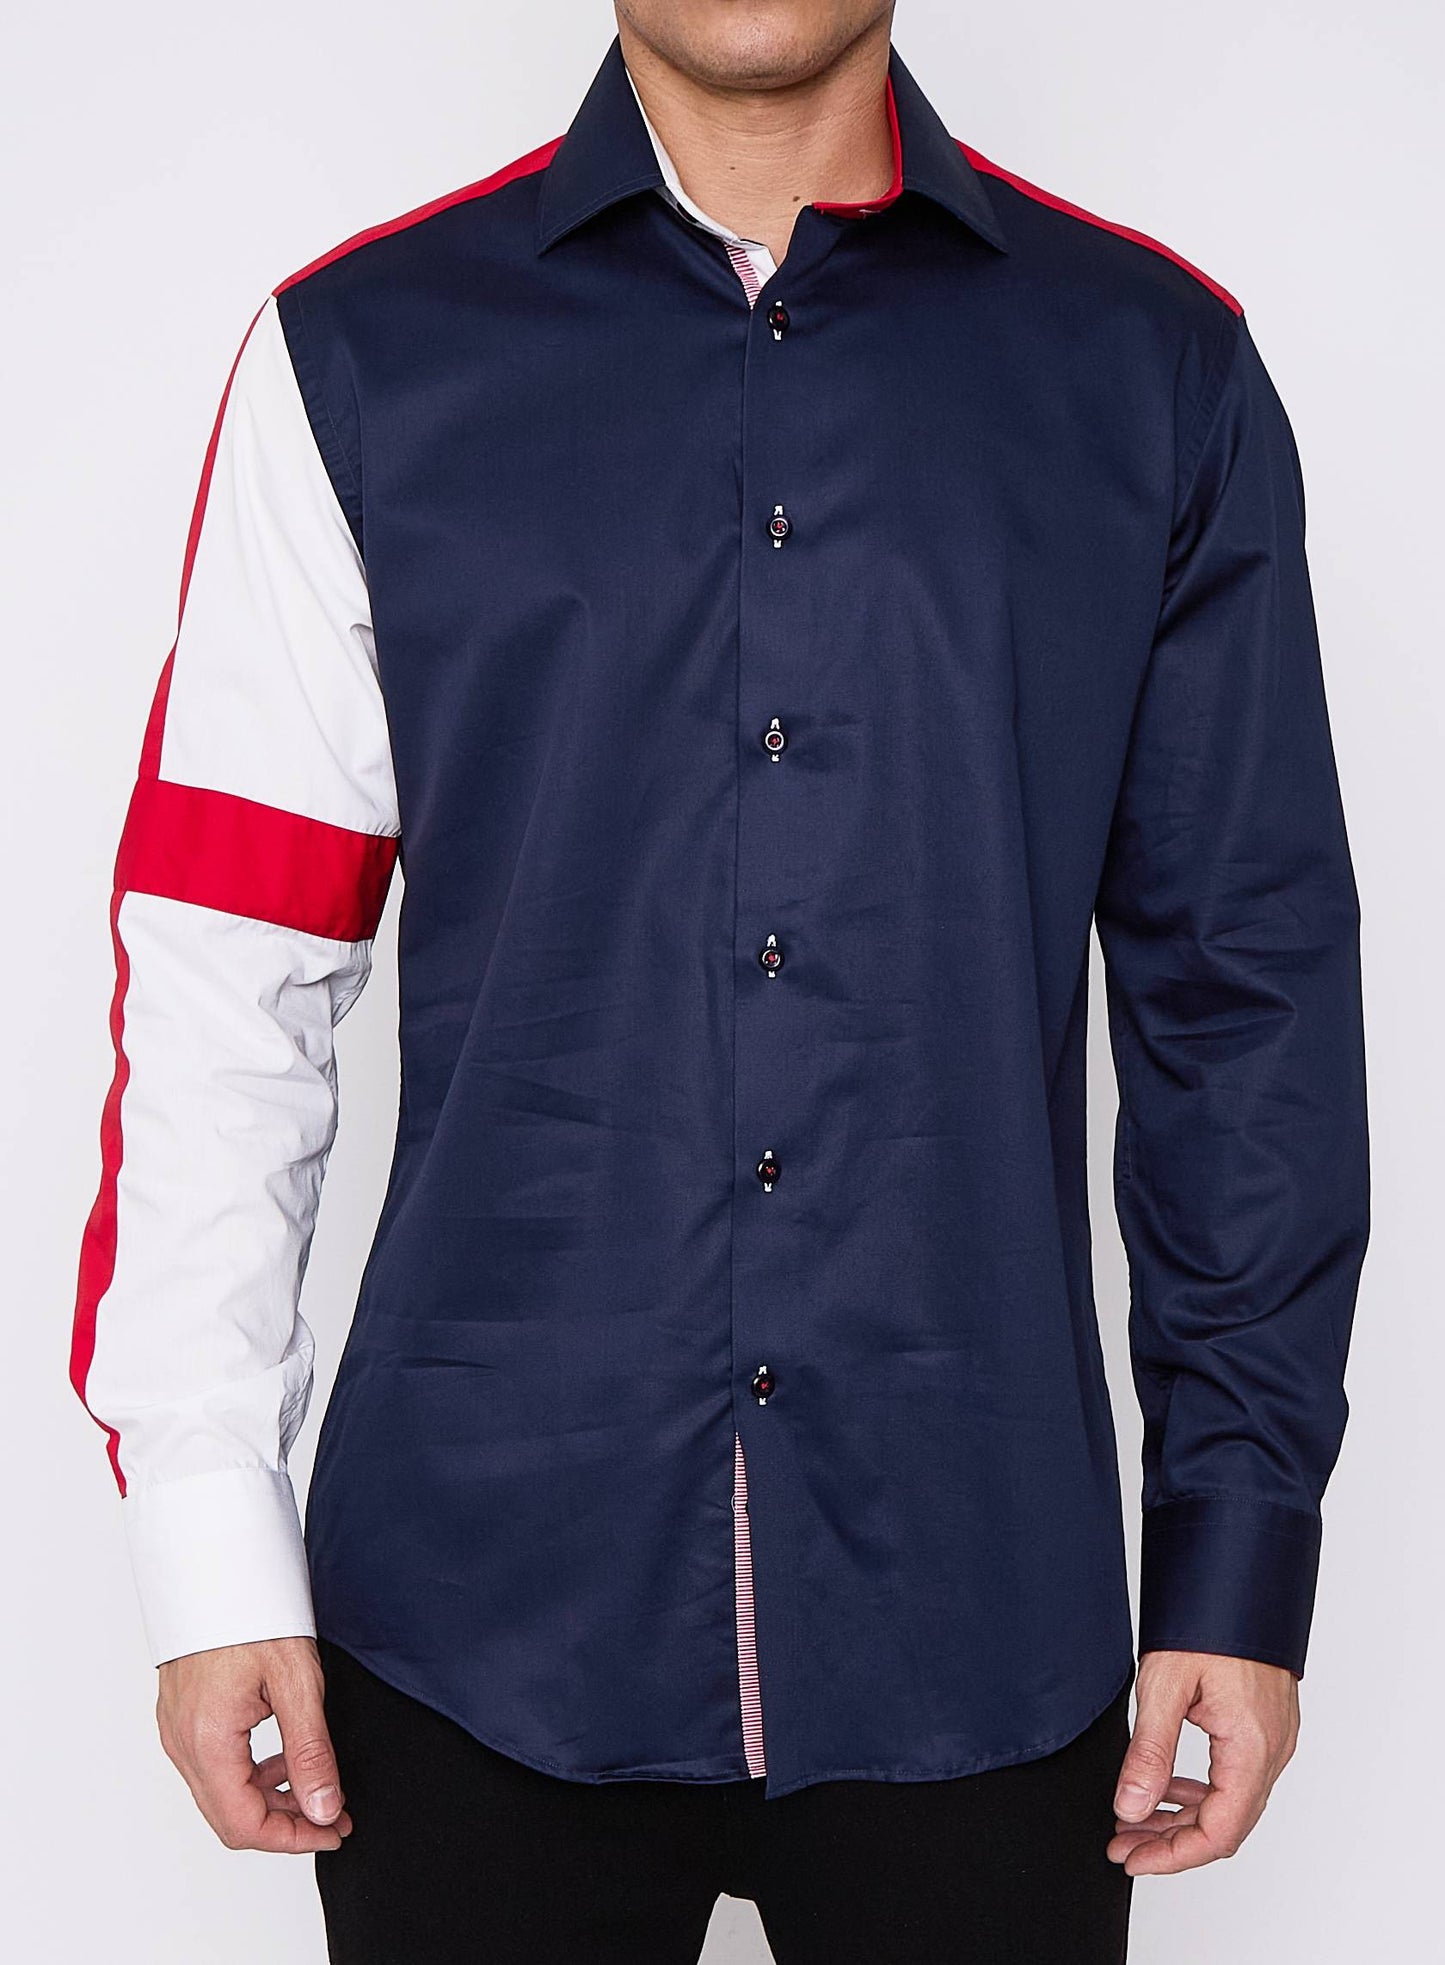 Men Navy Regular Fit Shirt with England Union Jack on Sleeves SC302